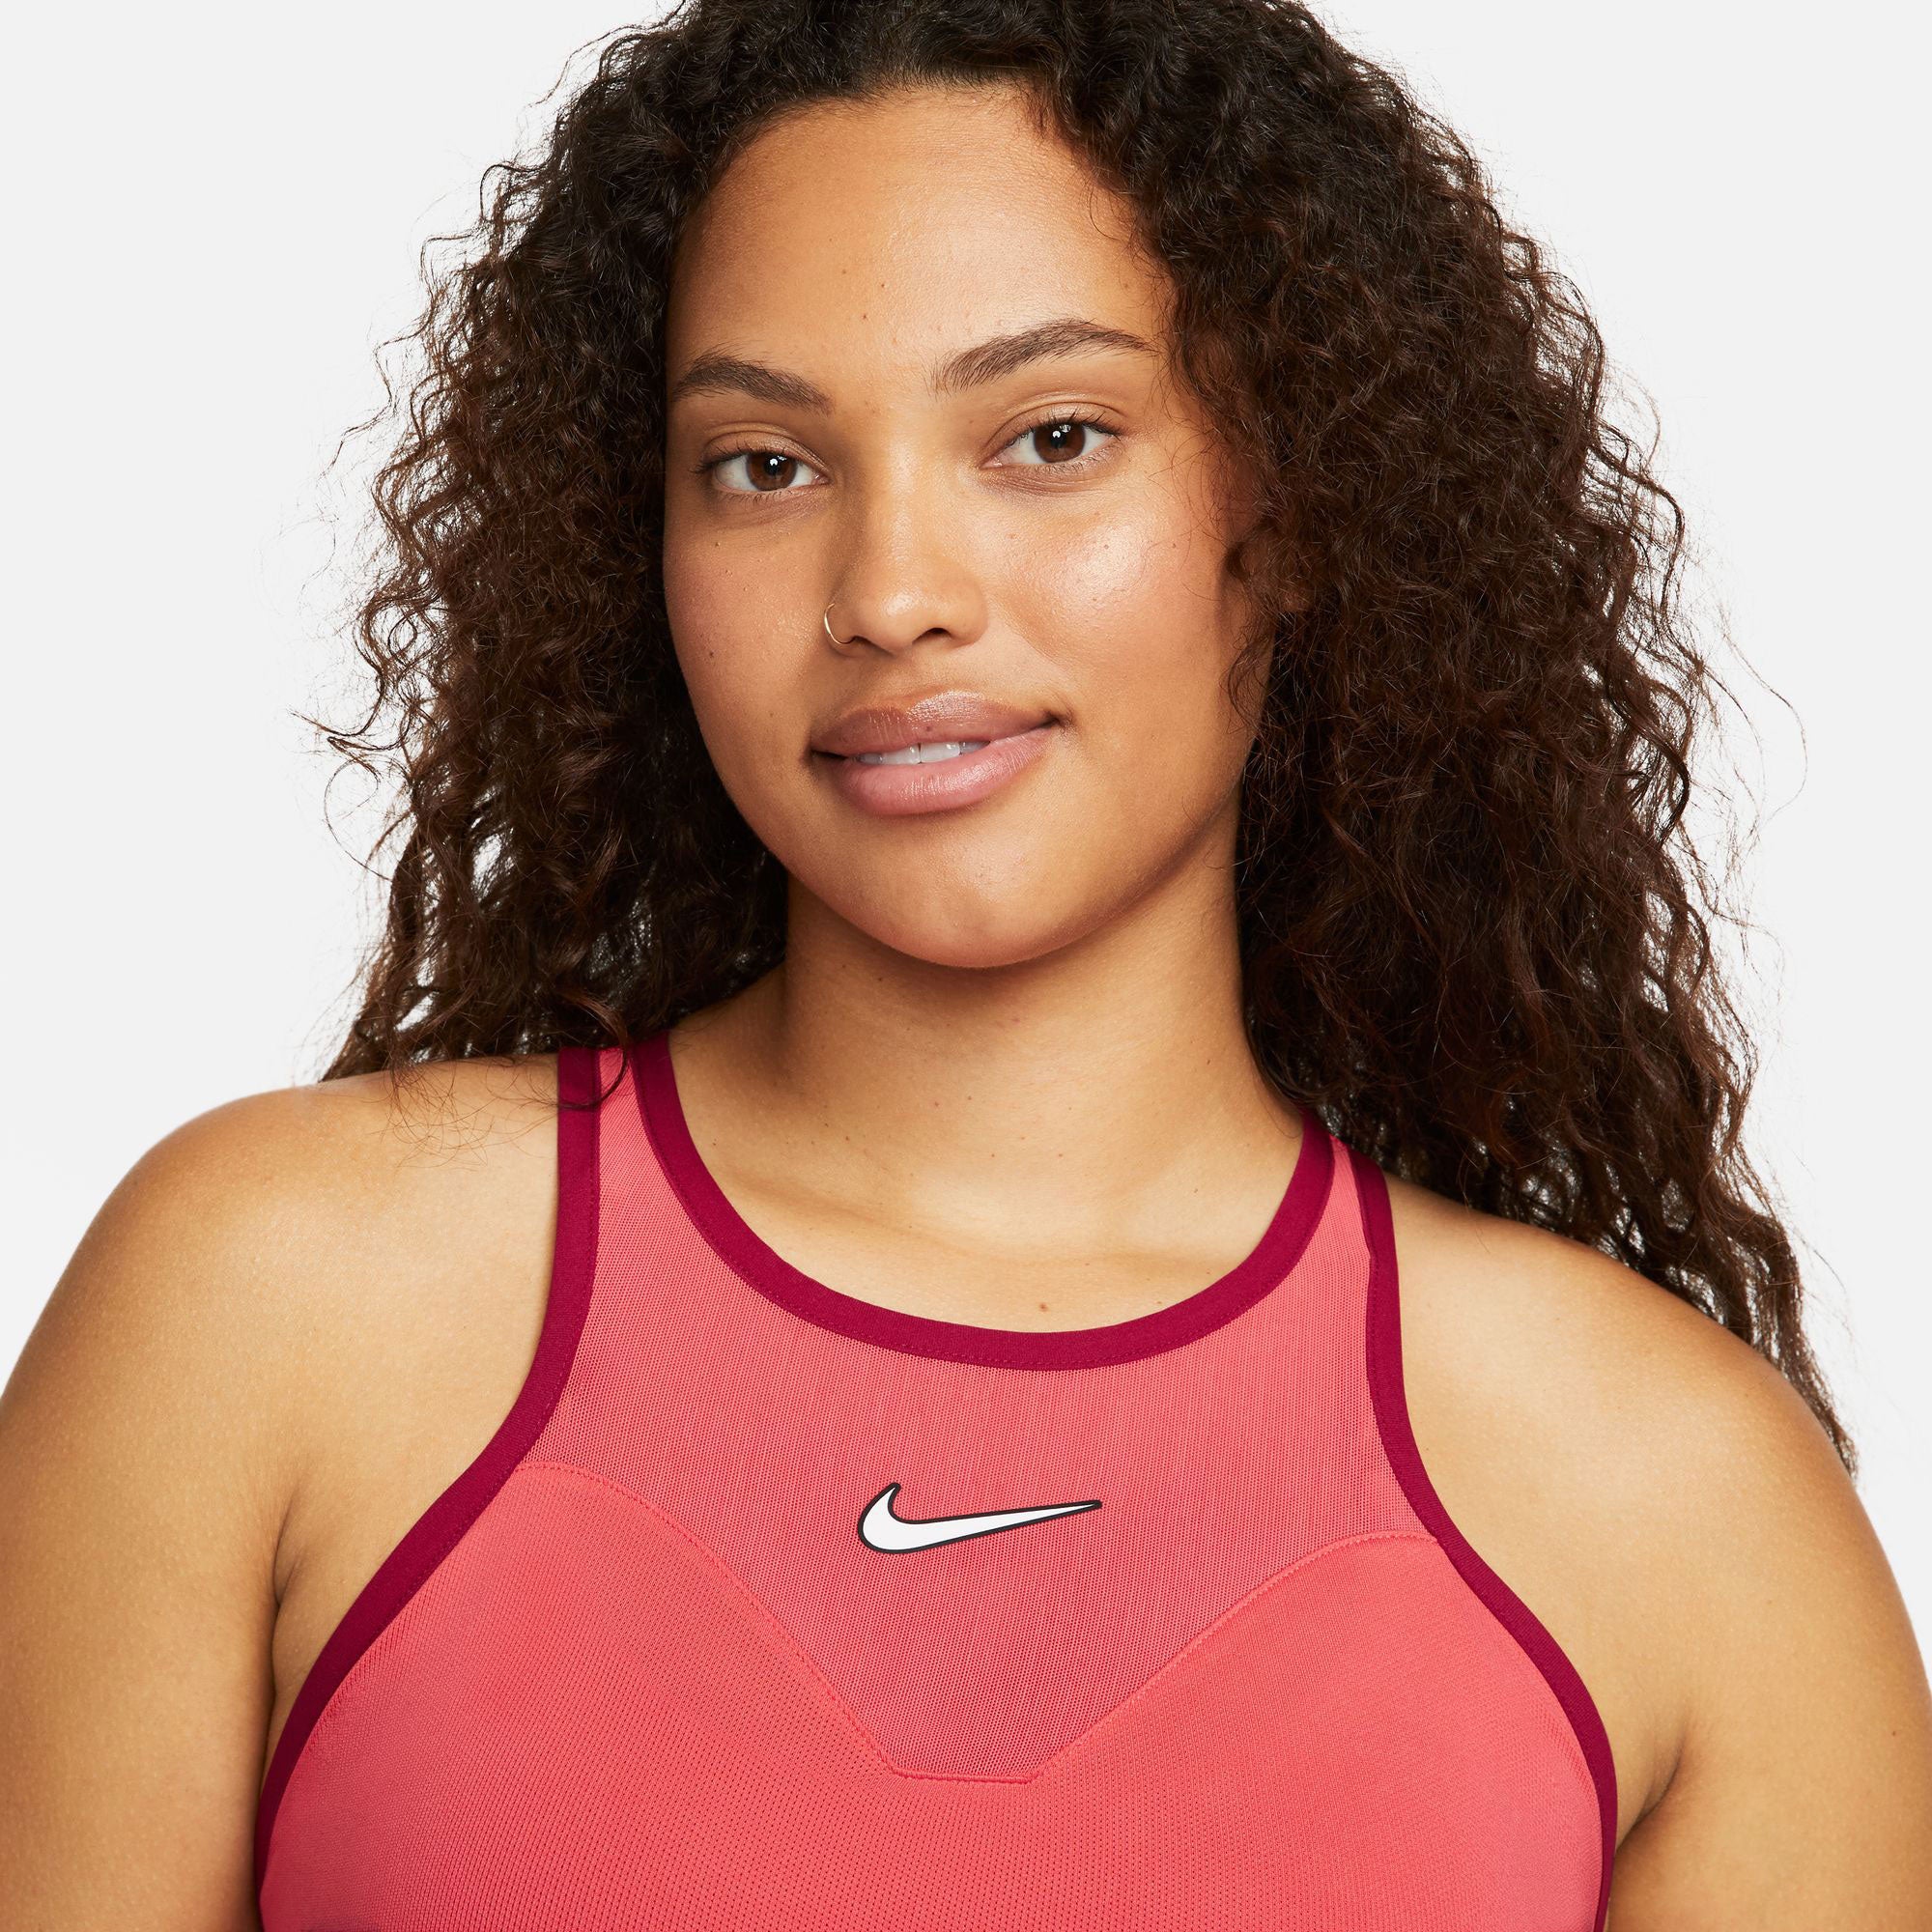 Nike Dri-Fit Athletic Tank Top Shirt Womens Size Extra Small XS Pink